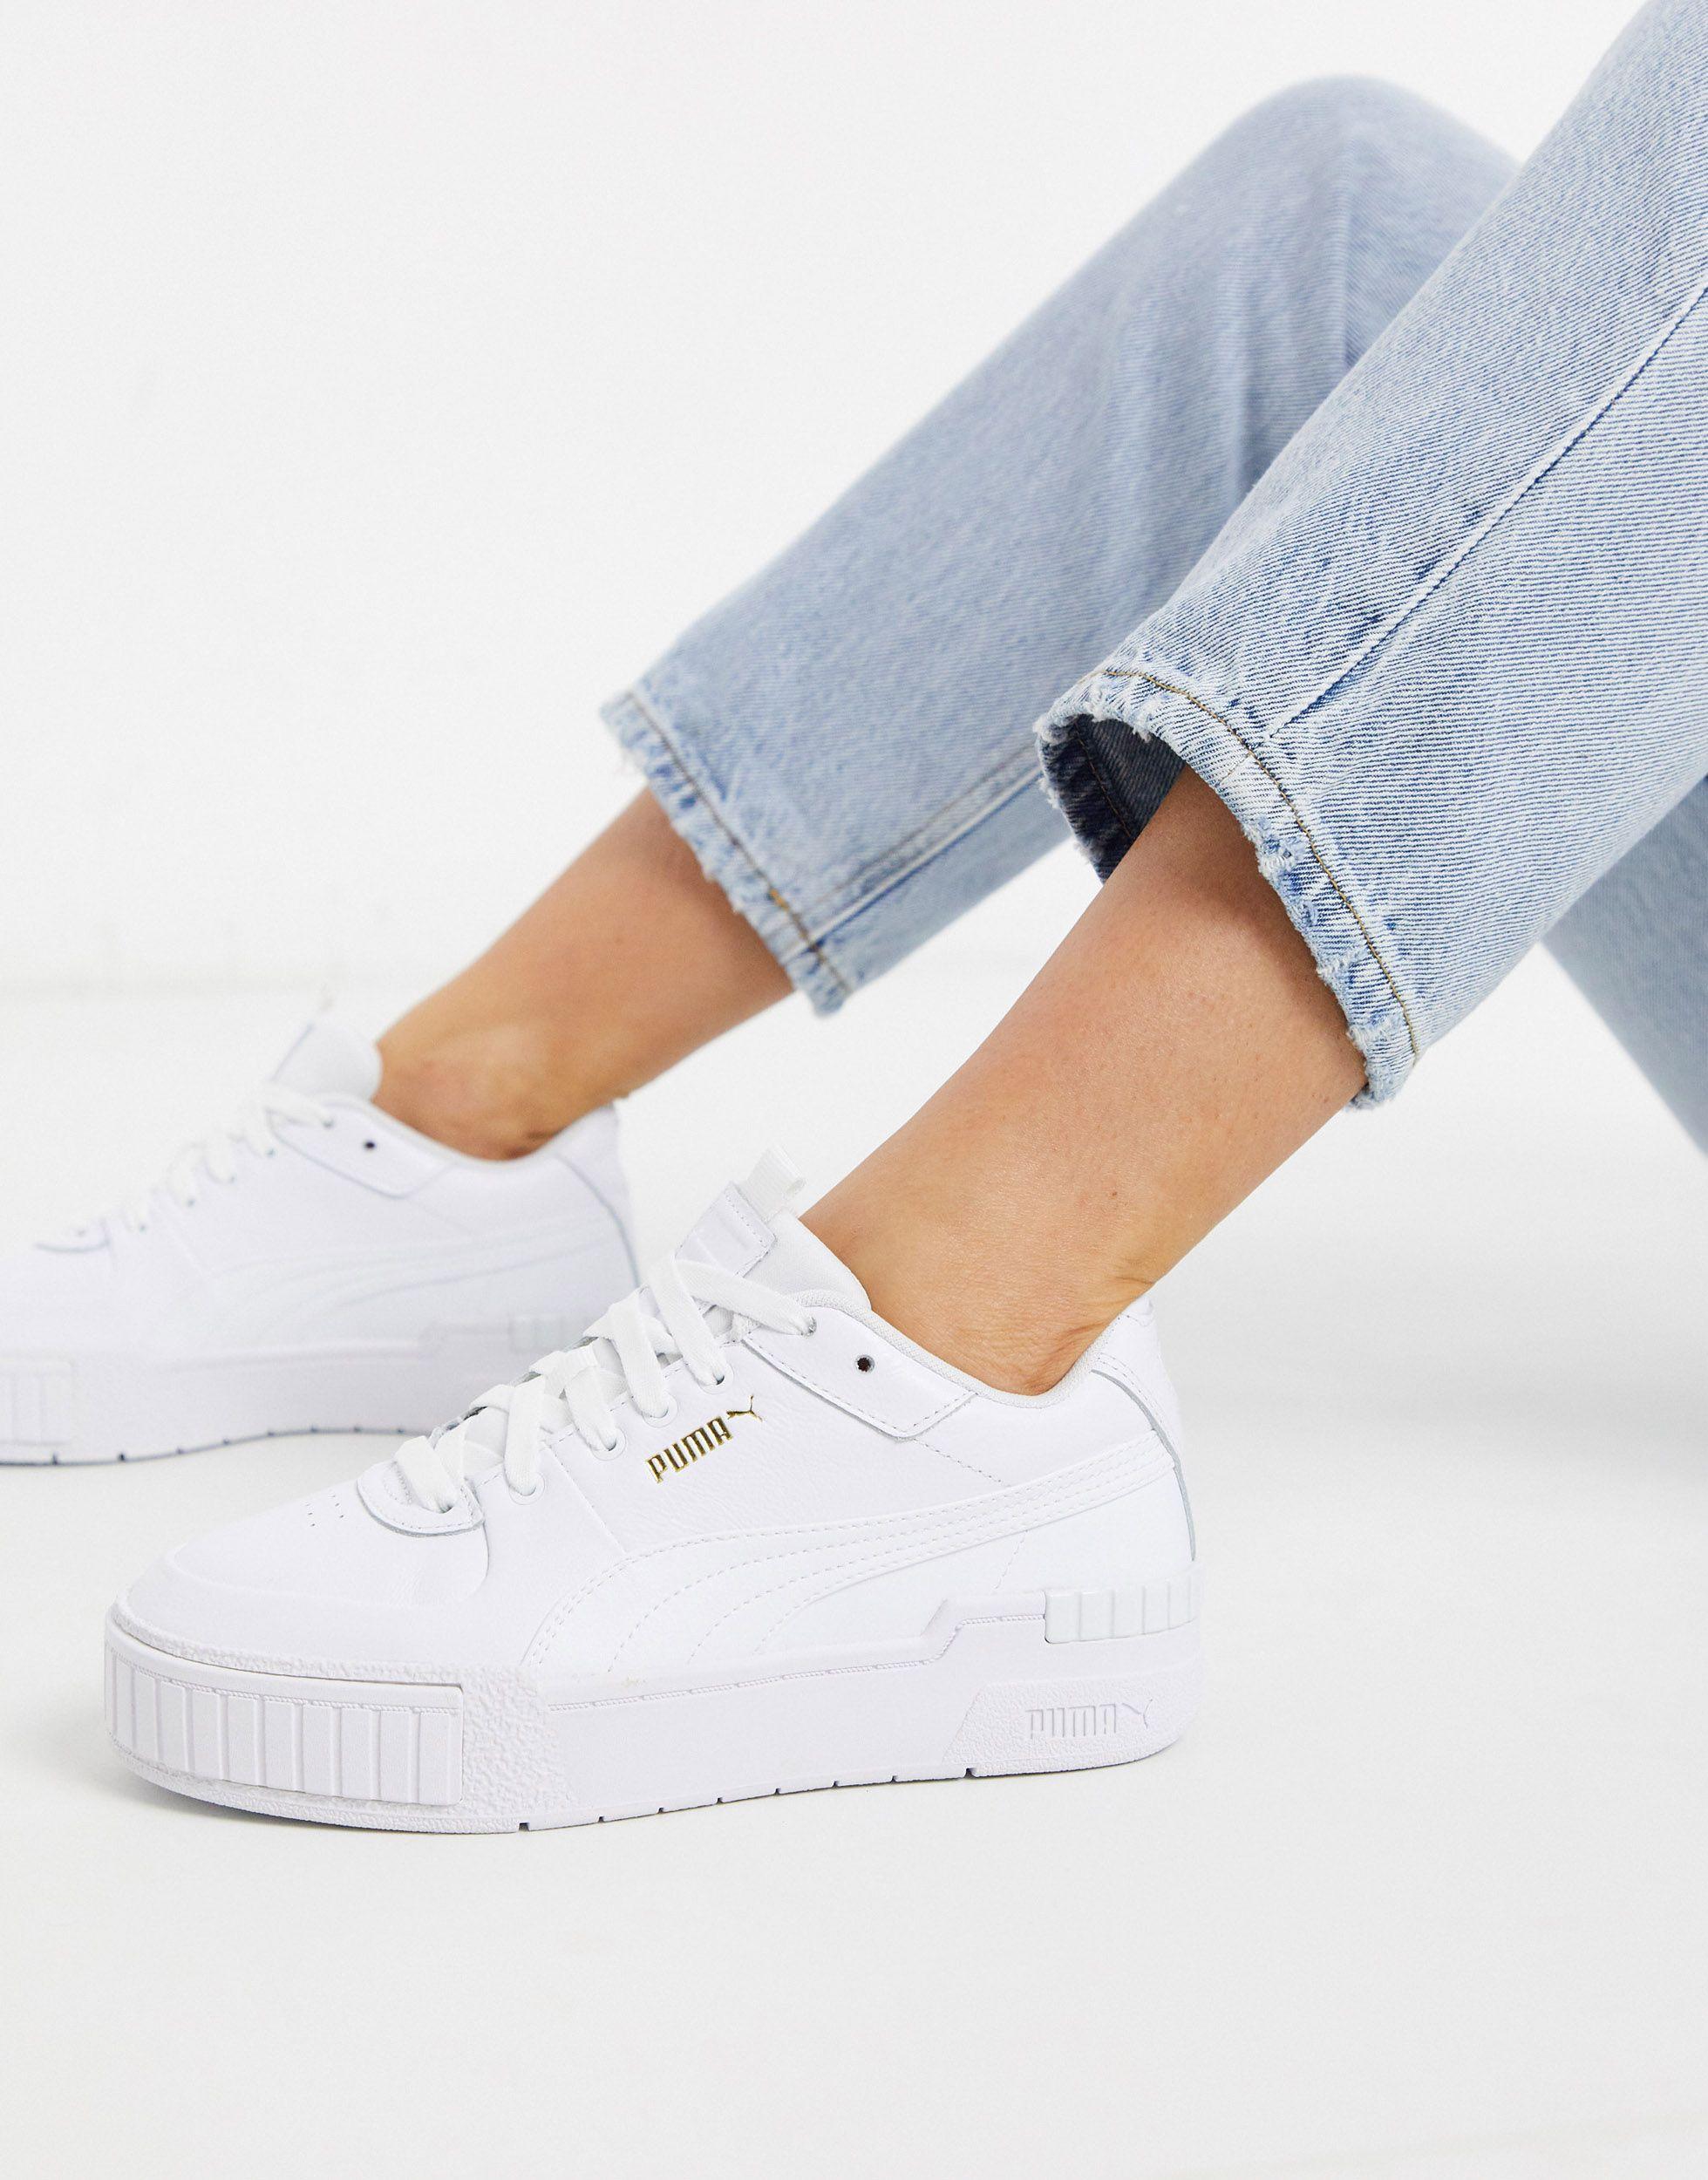 PUMA Leather Cali Sport Chunky Sneakers in White - Save 30% - Lyst